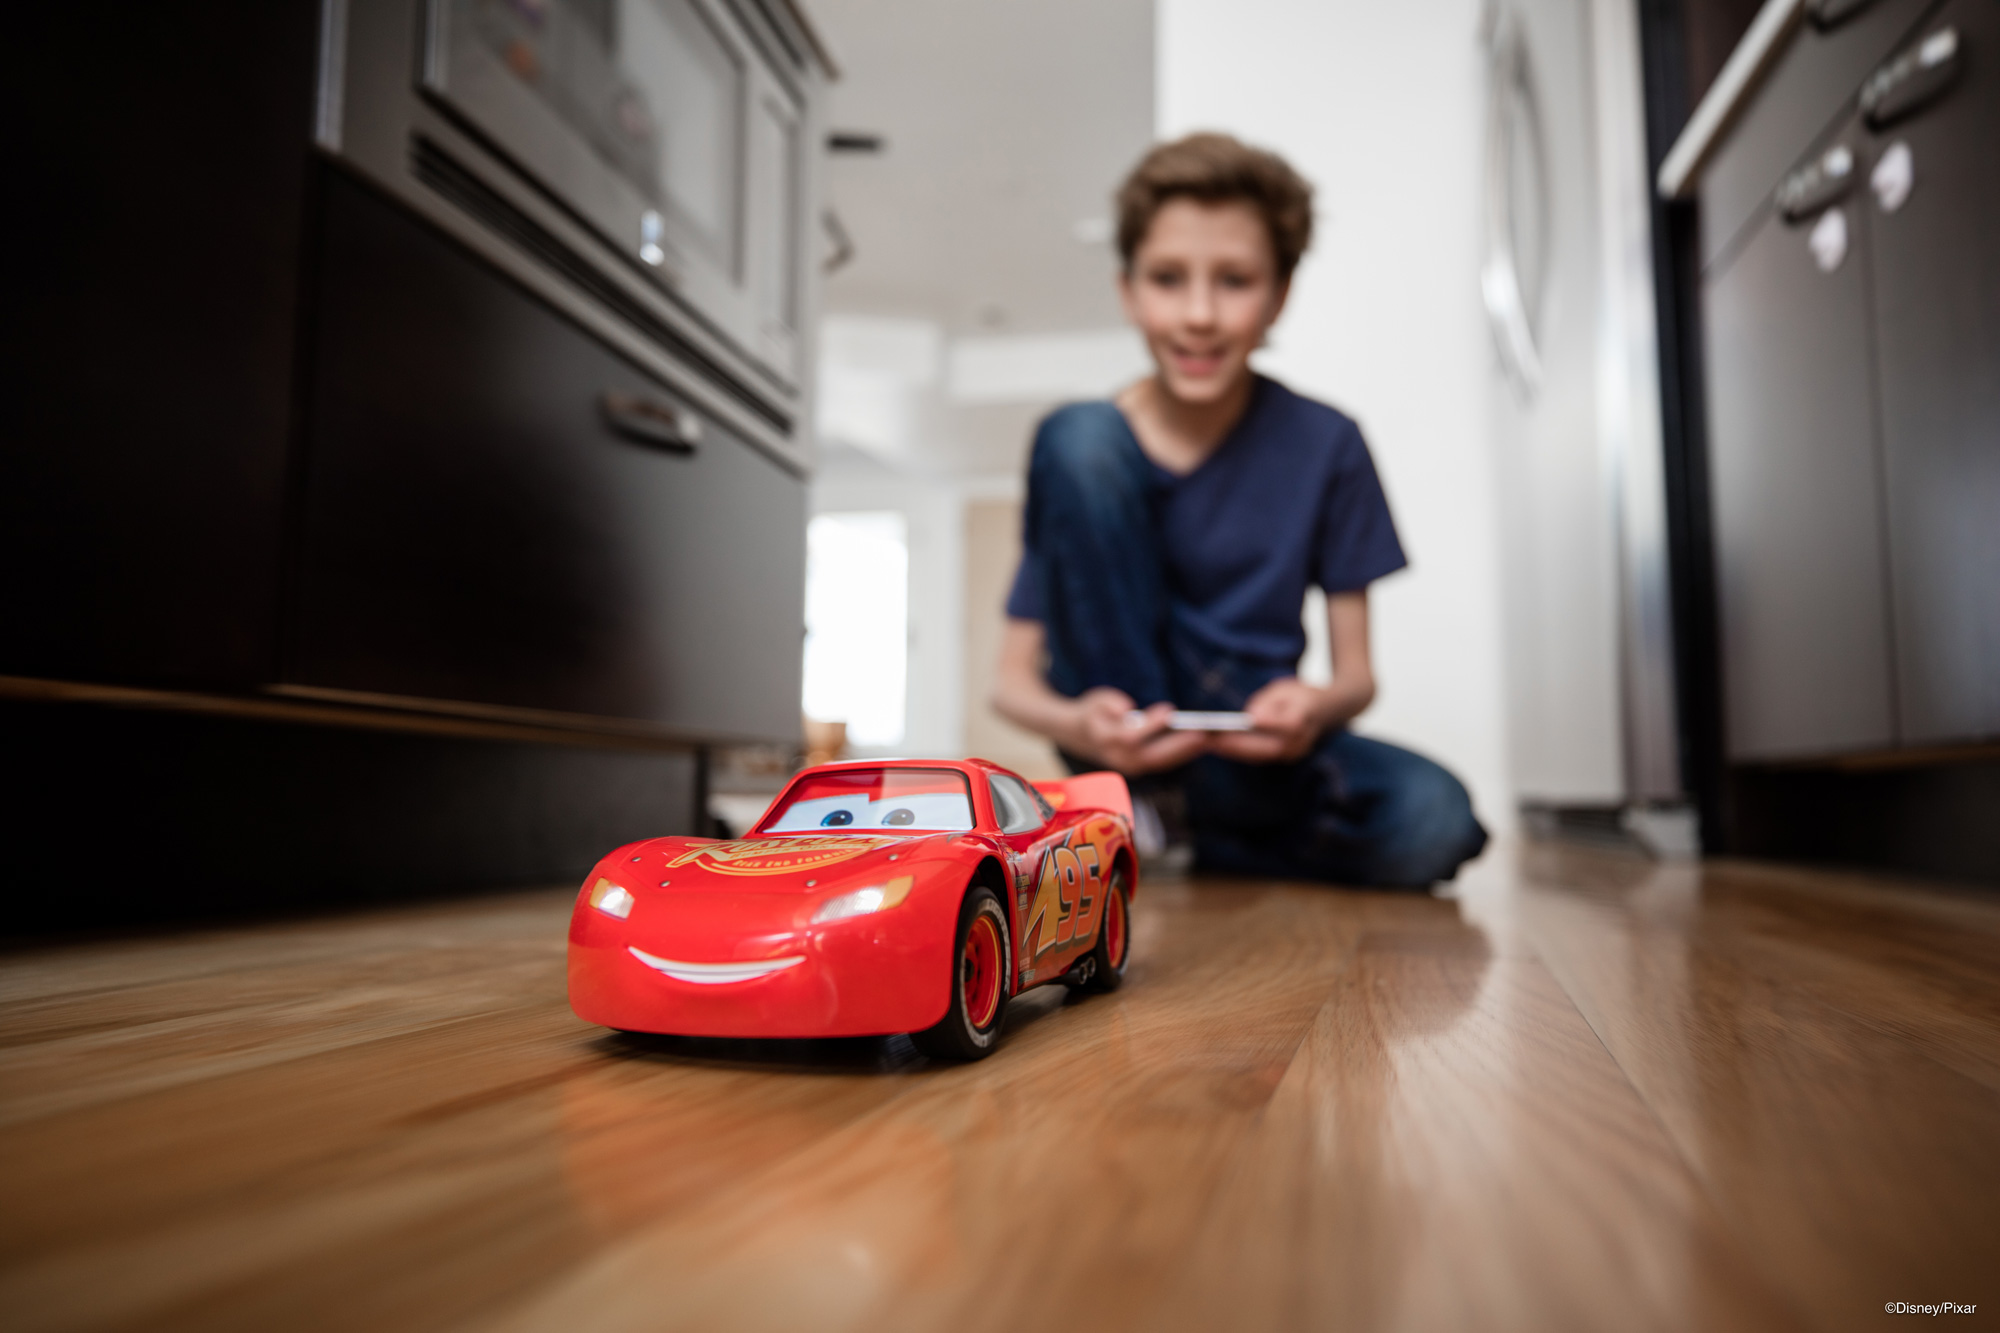 Sphero and Disney•Pixar Put Pedal to the Metal with App-Enabled Ultimate Lightning McQueen